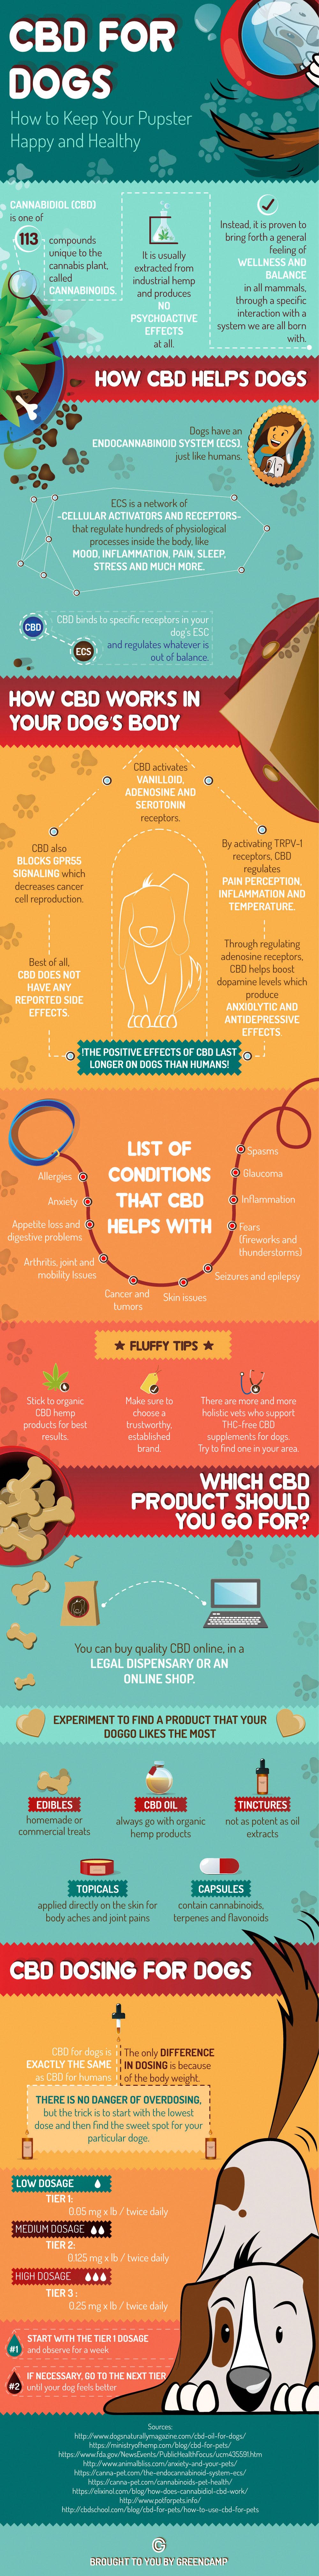 CBD for Dogs: How to Keep Your Puppster Happy and Healthy